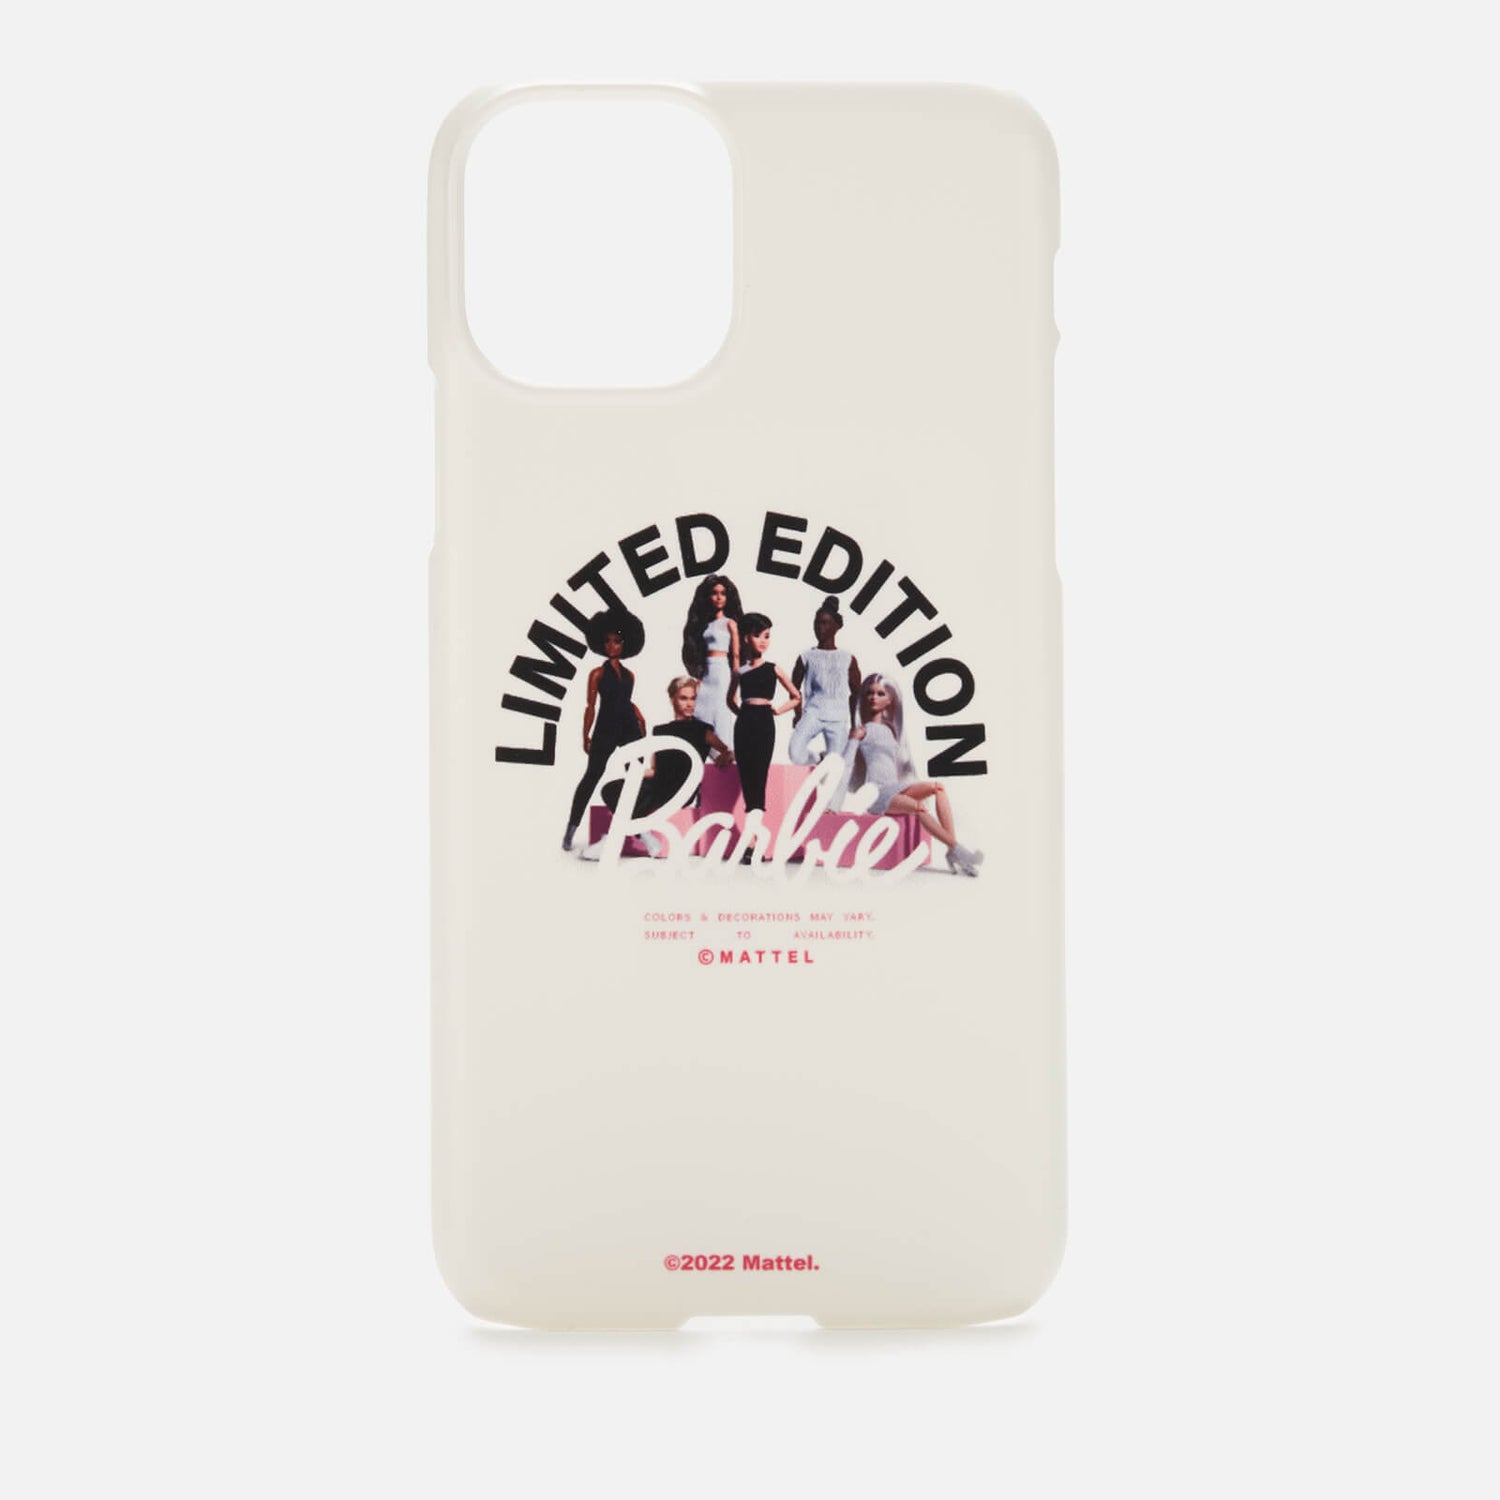 Barbie Limited Edition Phone Case for iPhone and Android